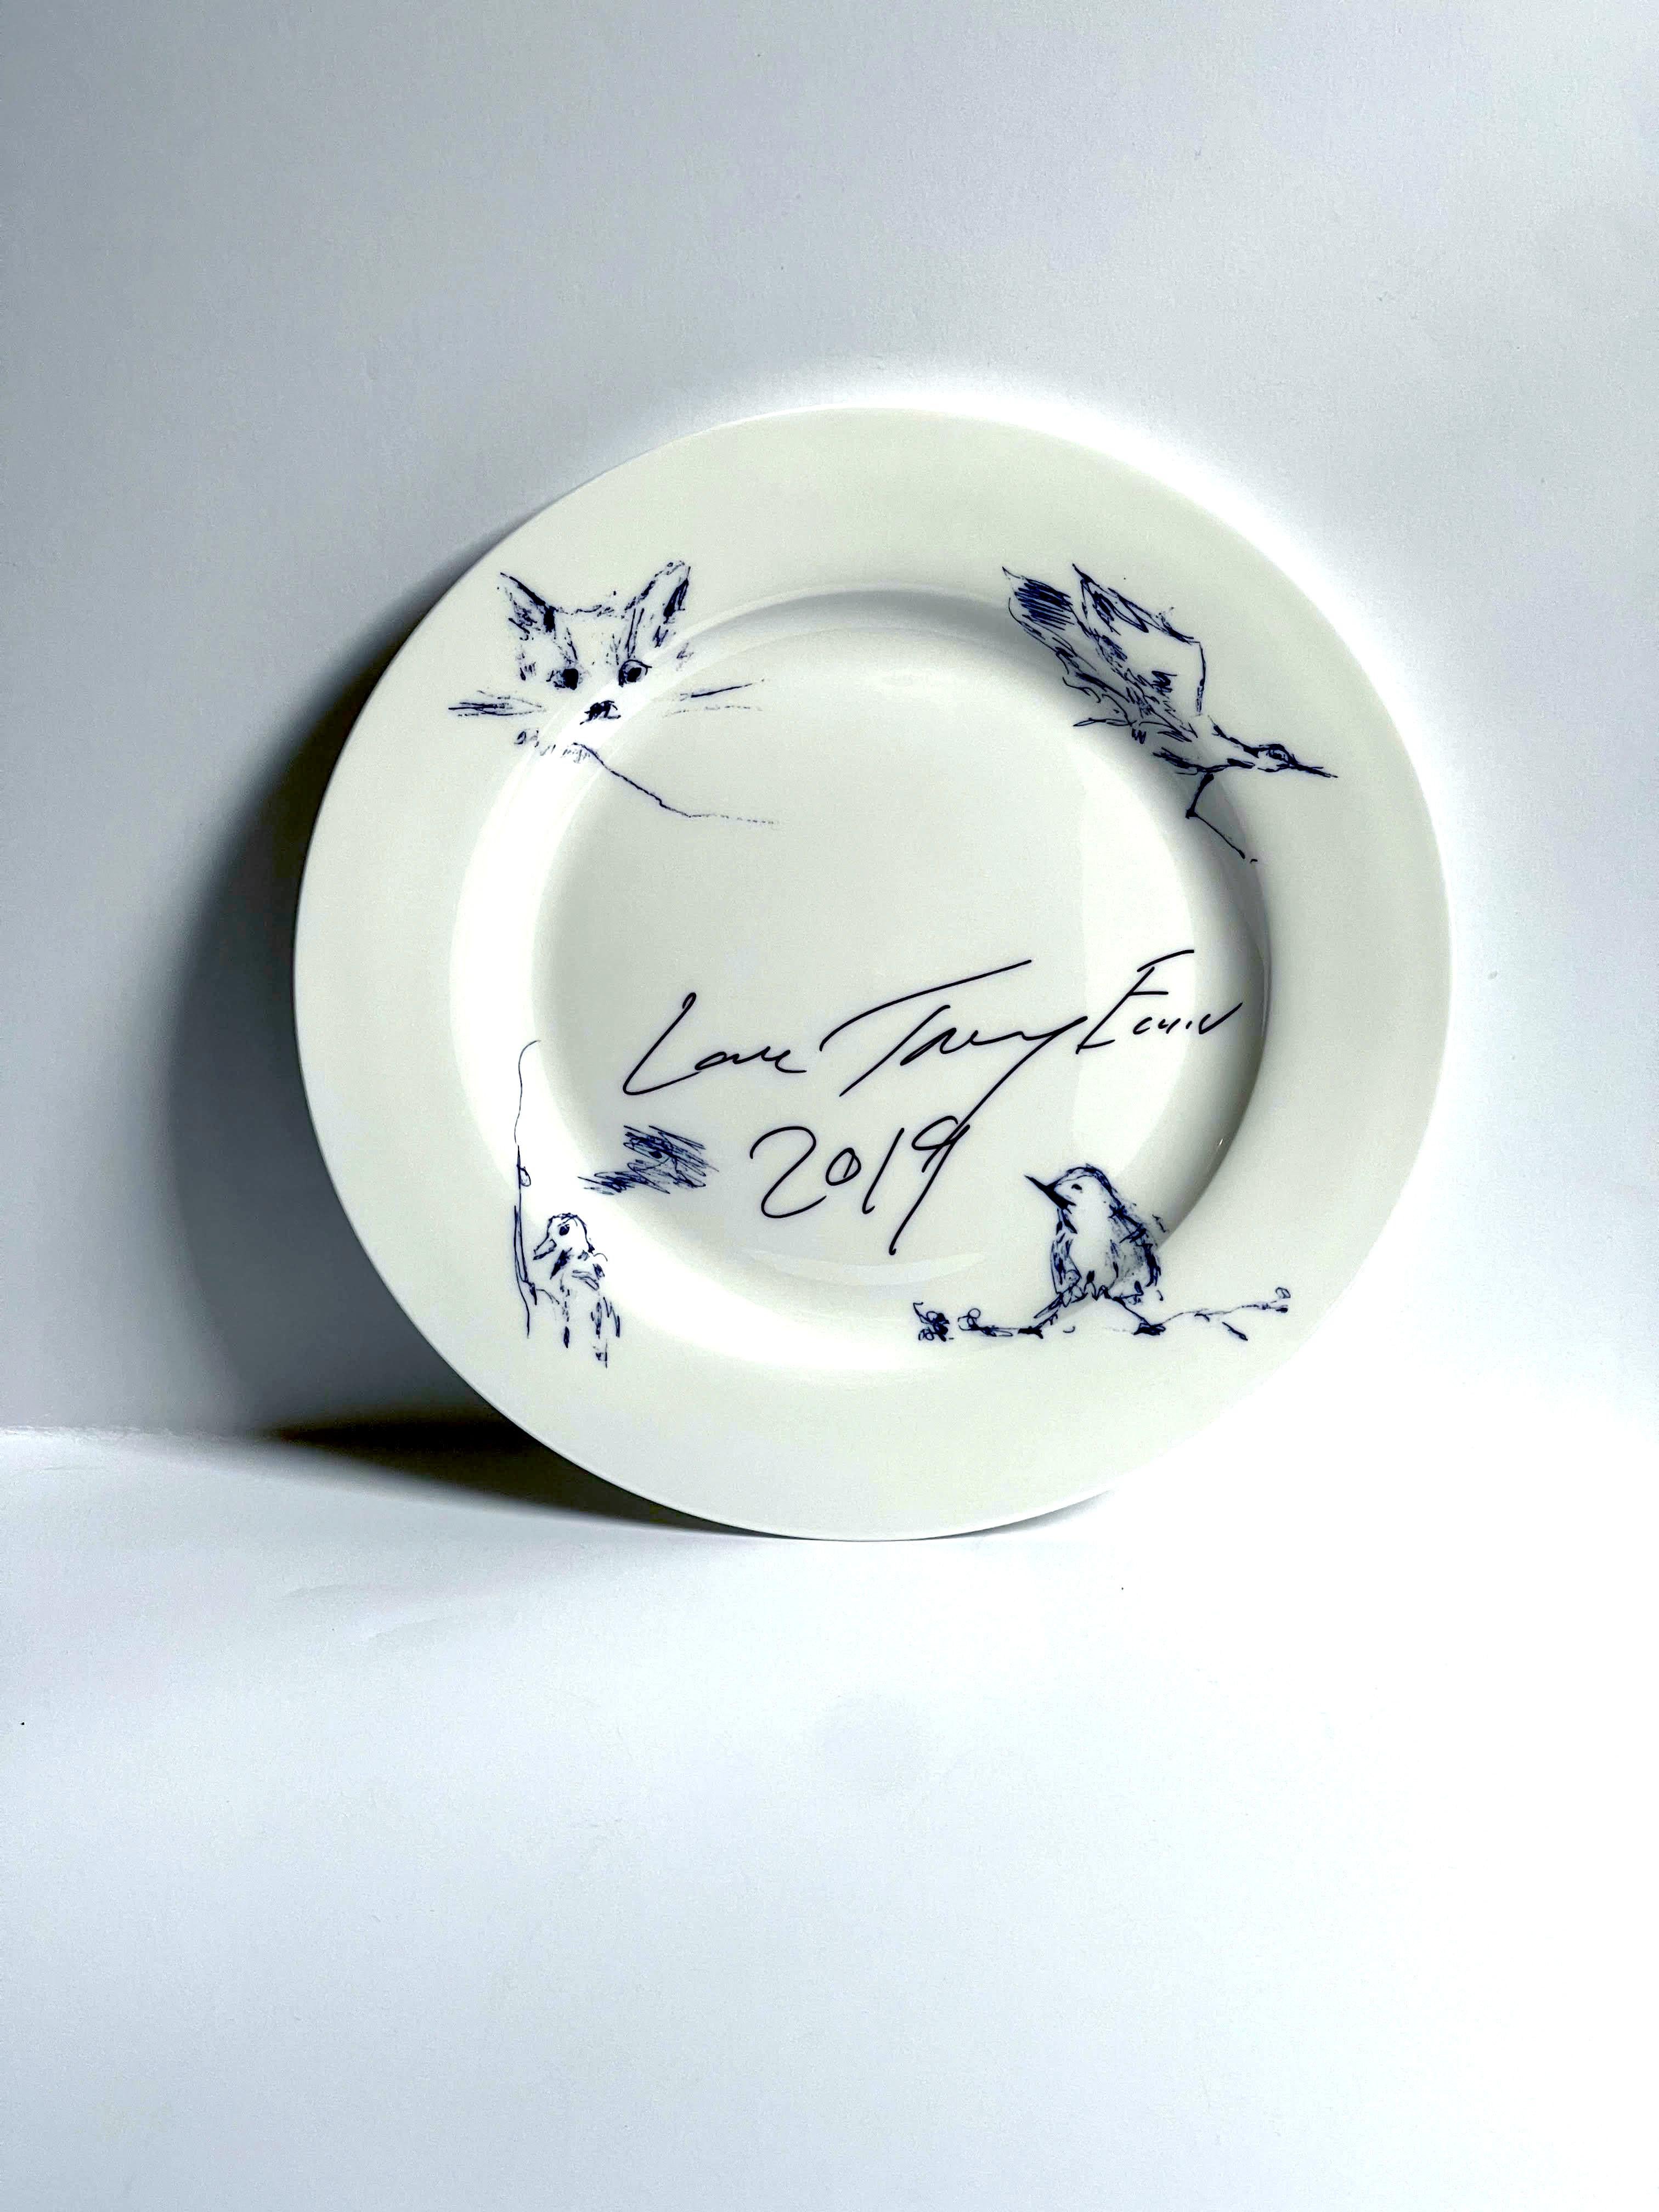 Docket and His Bird Collection plate (uniquely hand signed and inscribed)  - Pop Art Art by Tracey Emin